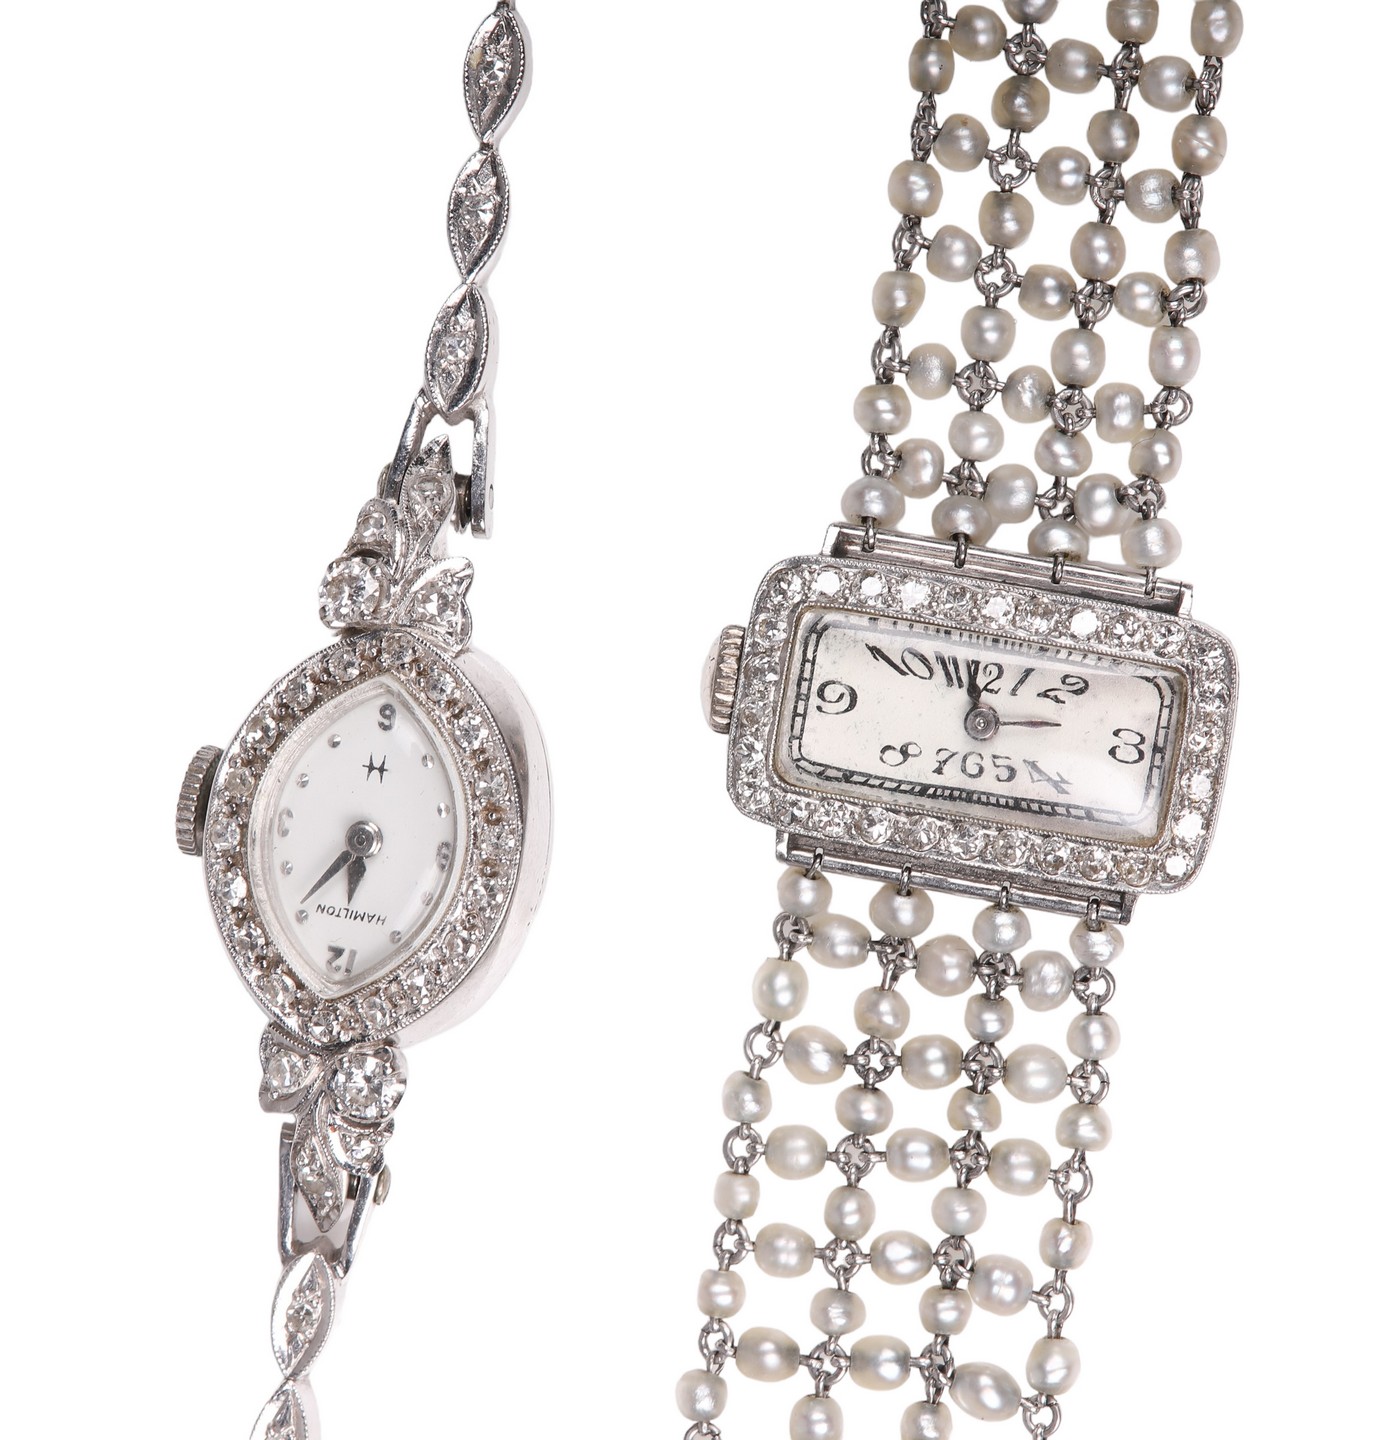  2 Ladies bracelet watches to 27a42a